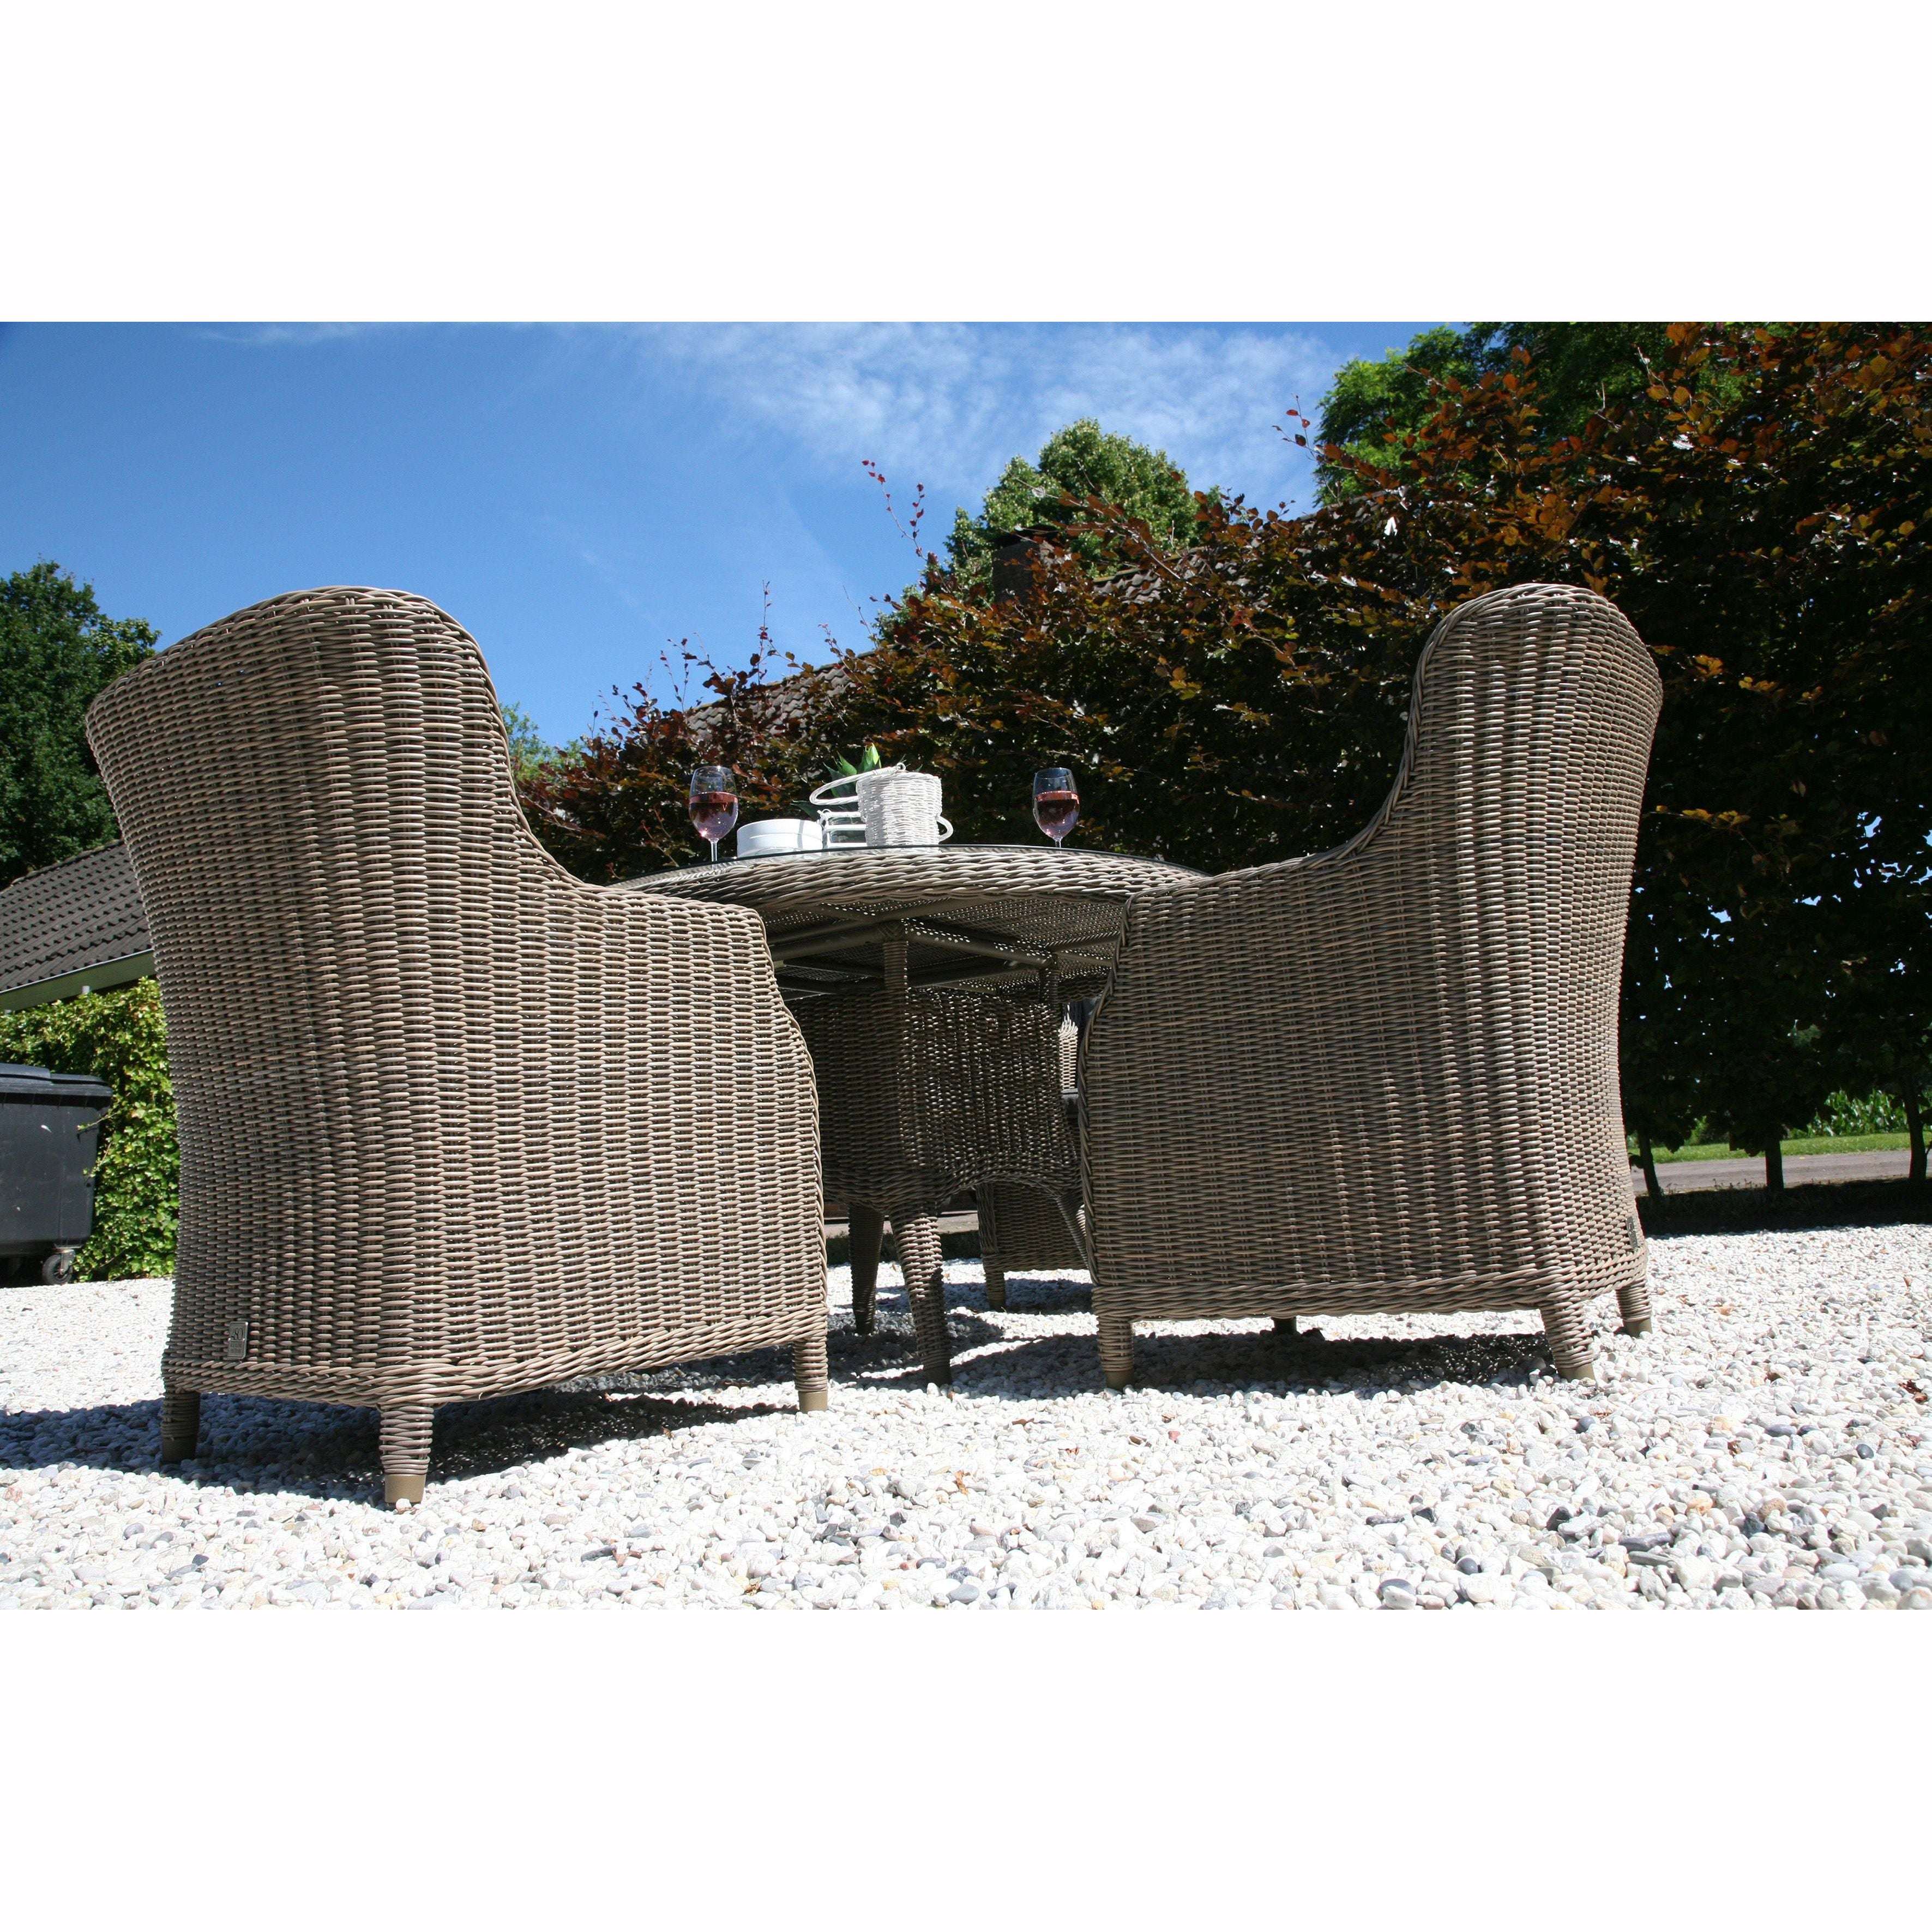 Exceptional Garden:4 Seasons Outdoor Brighton 4 Seater Dining set with Victoria Table